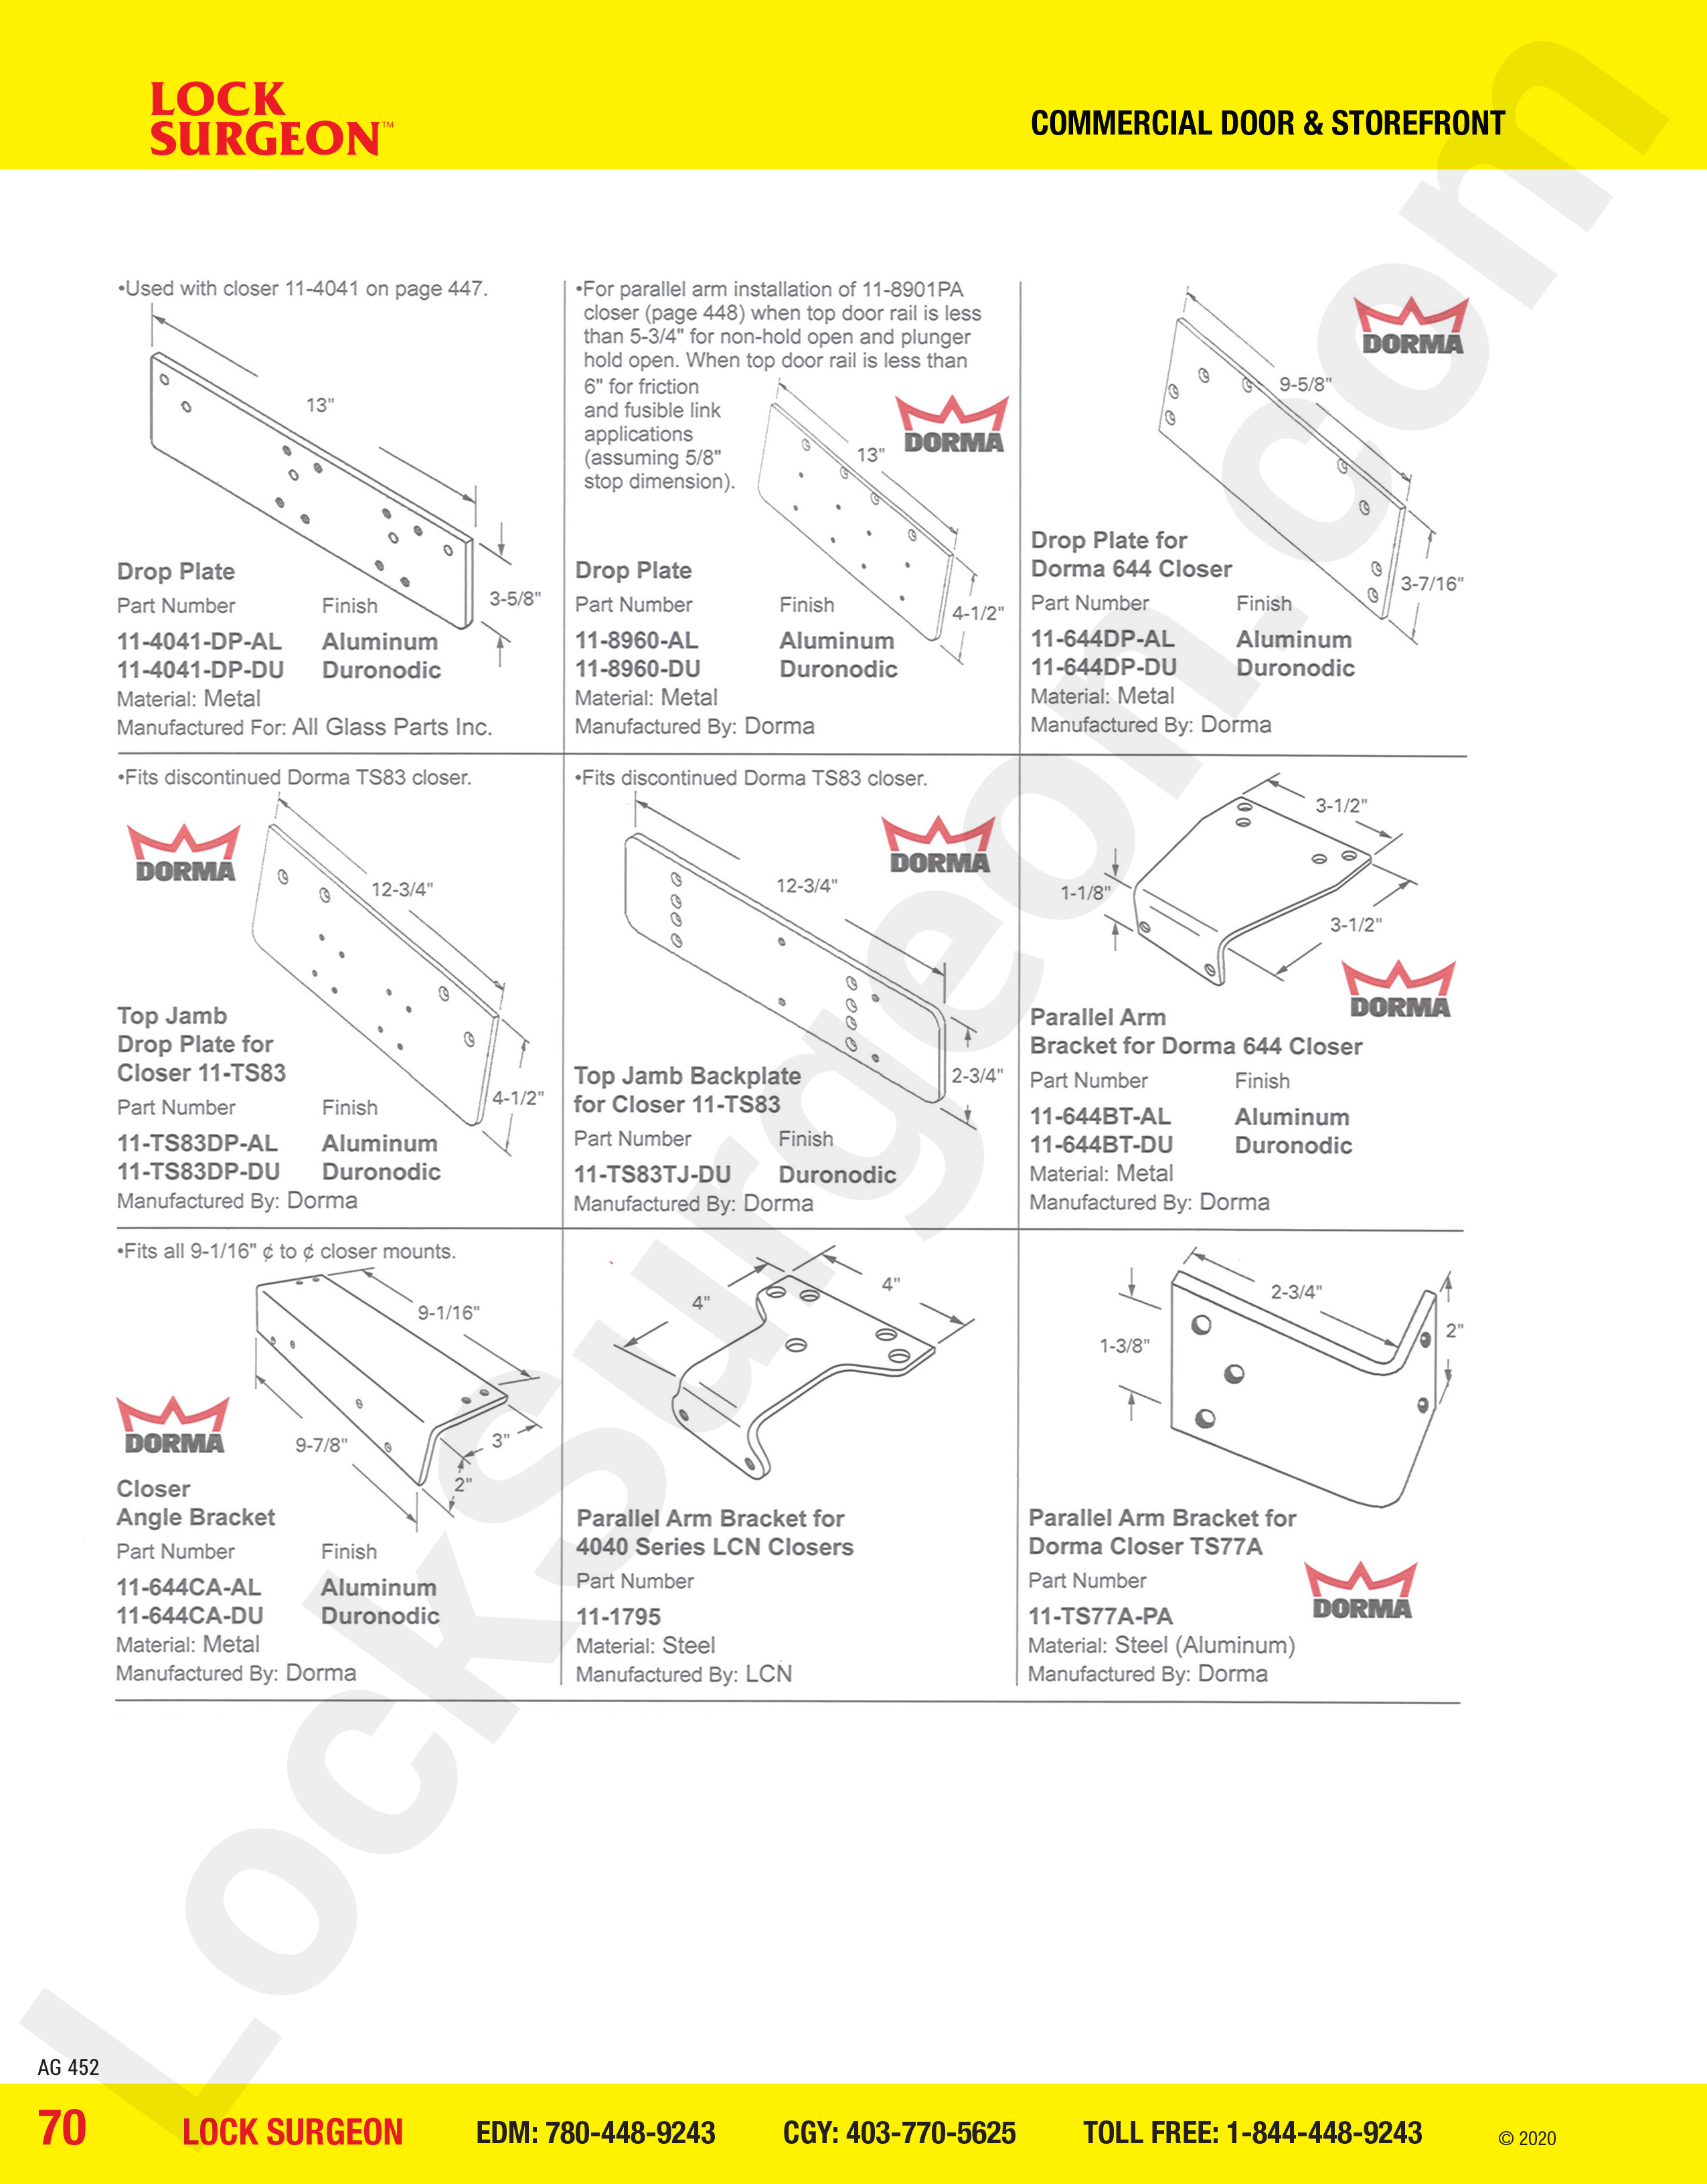 Commercial Door and Storefront parts for drop plates